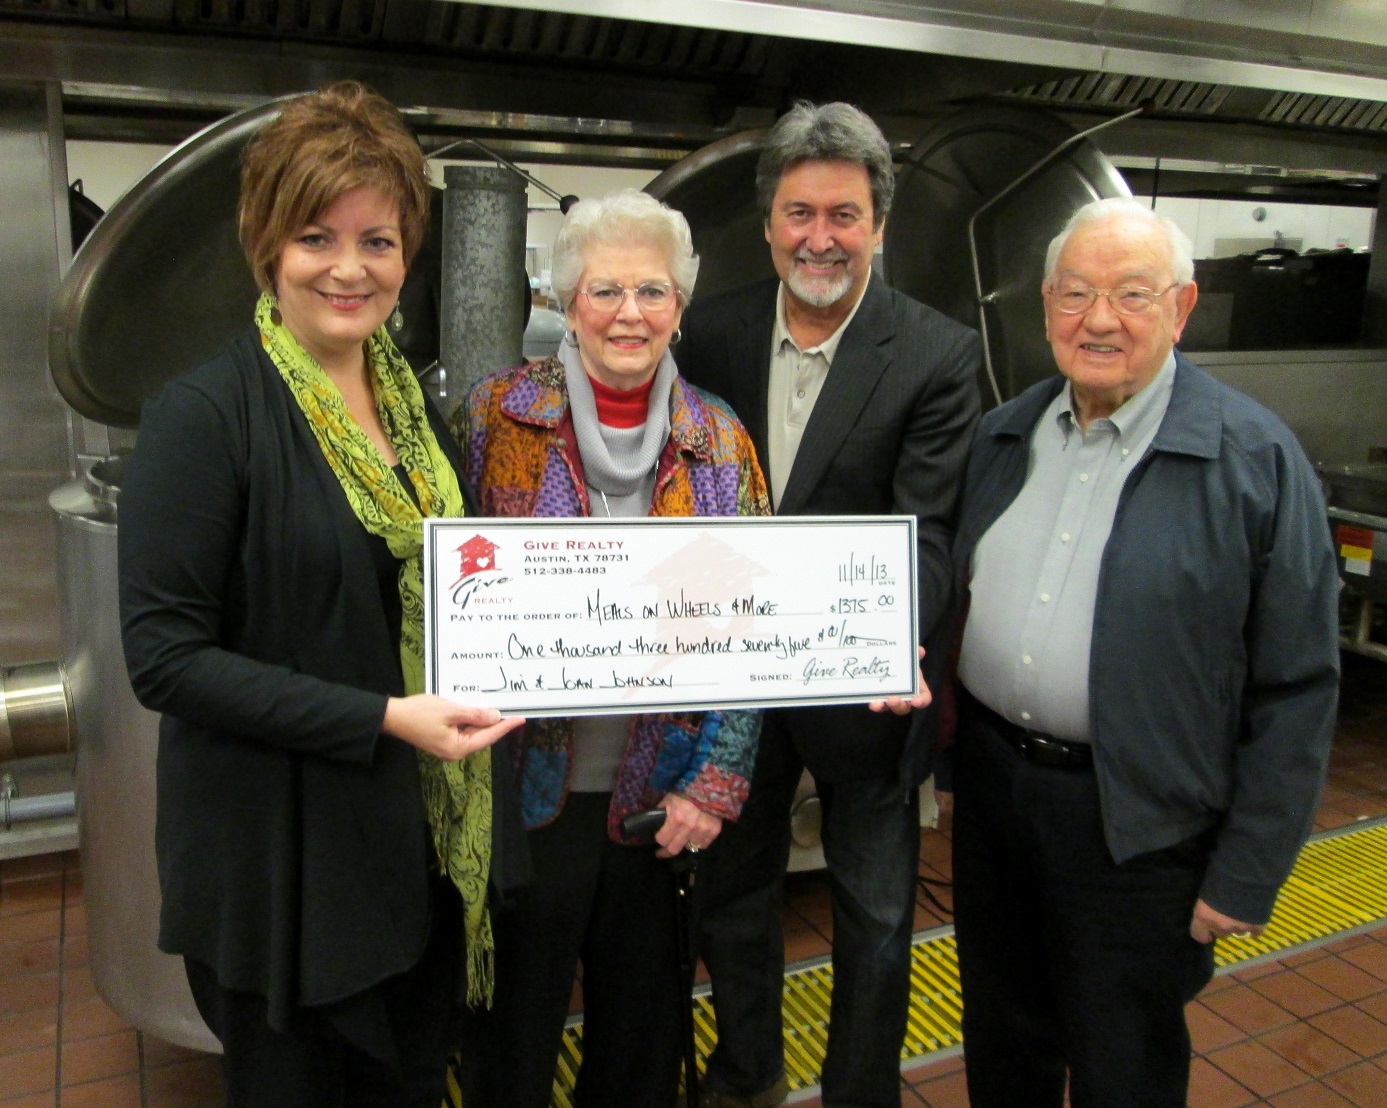 $1,375.00 Donated to Meals on Wheels and More on Behalf of Jim and Joan Johnson